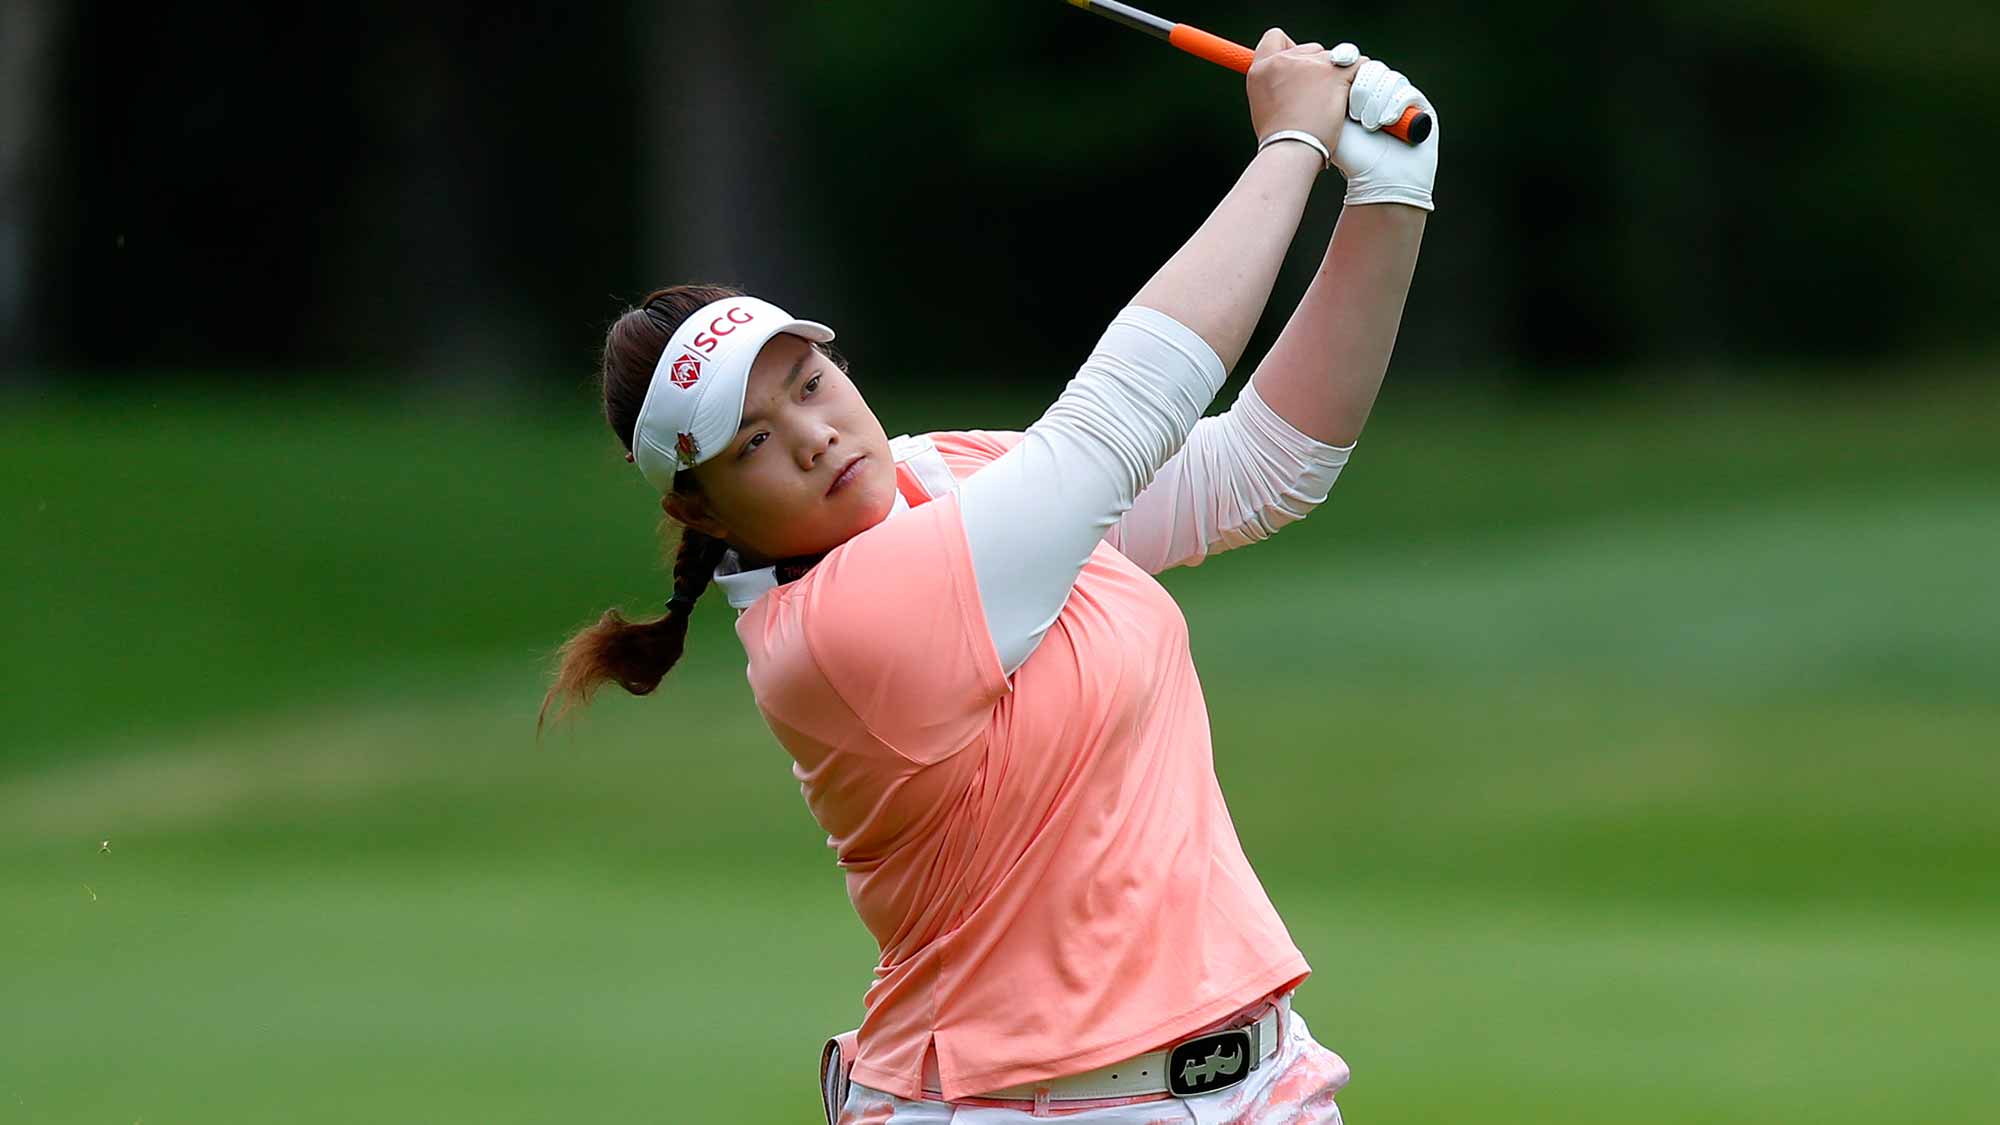 Ariya Jutanugarn of Thailand hits to the green on the 1st hole during the third round of the Canadian Pacific Women's Open at Priddis Greens Golf and Country Club 